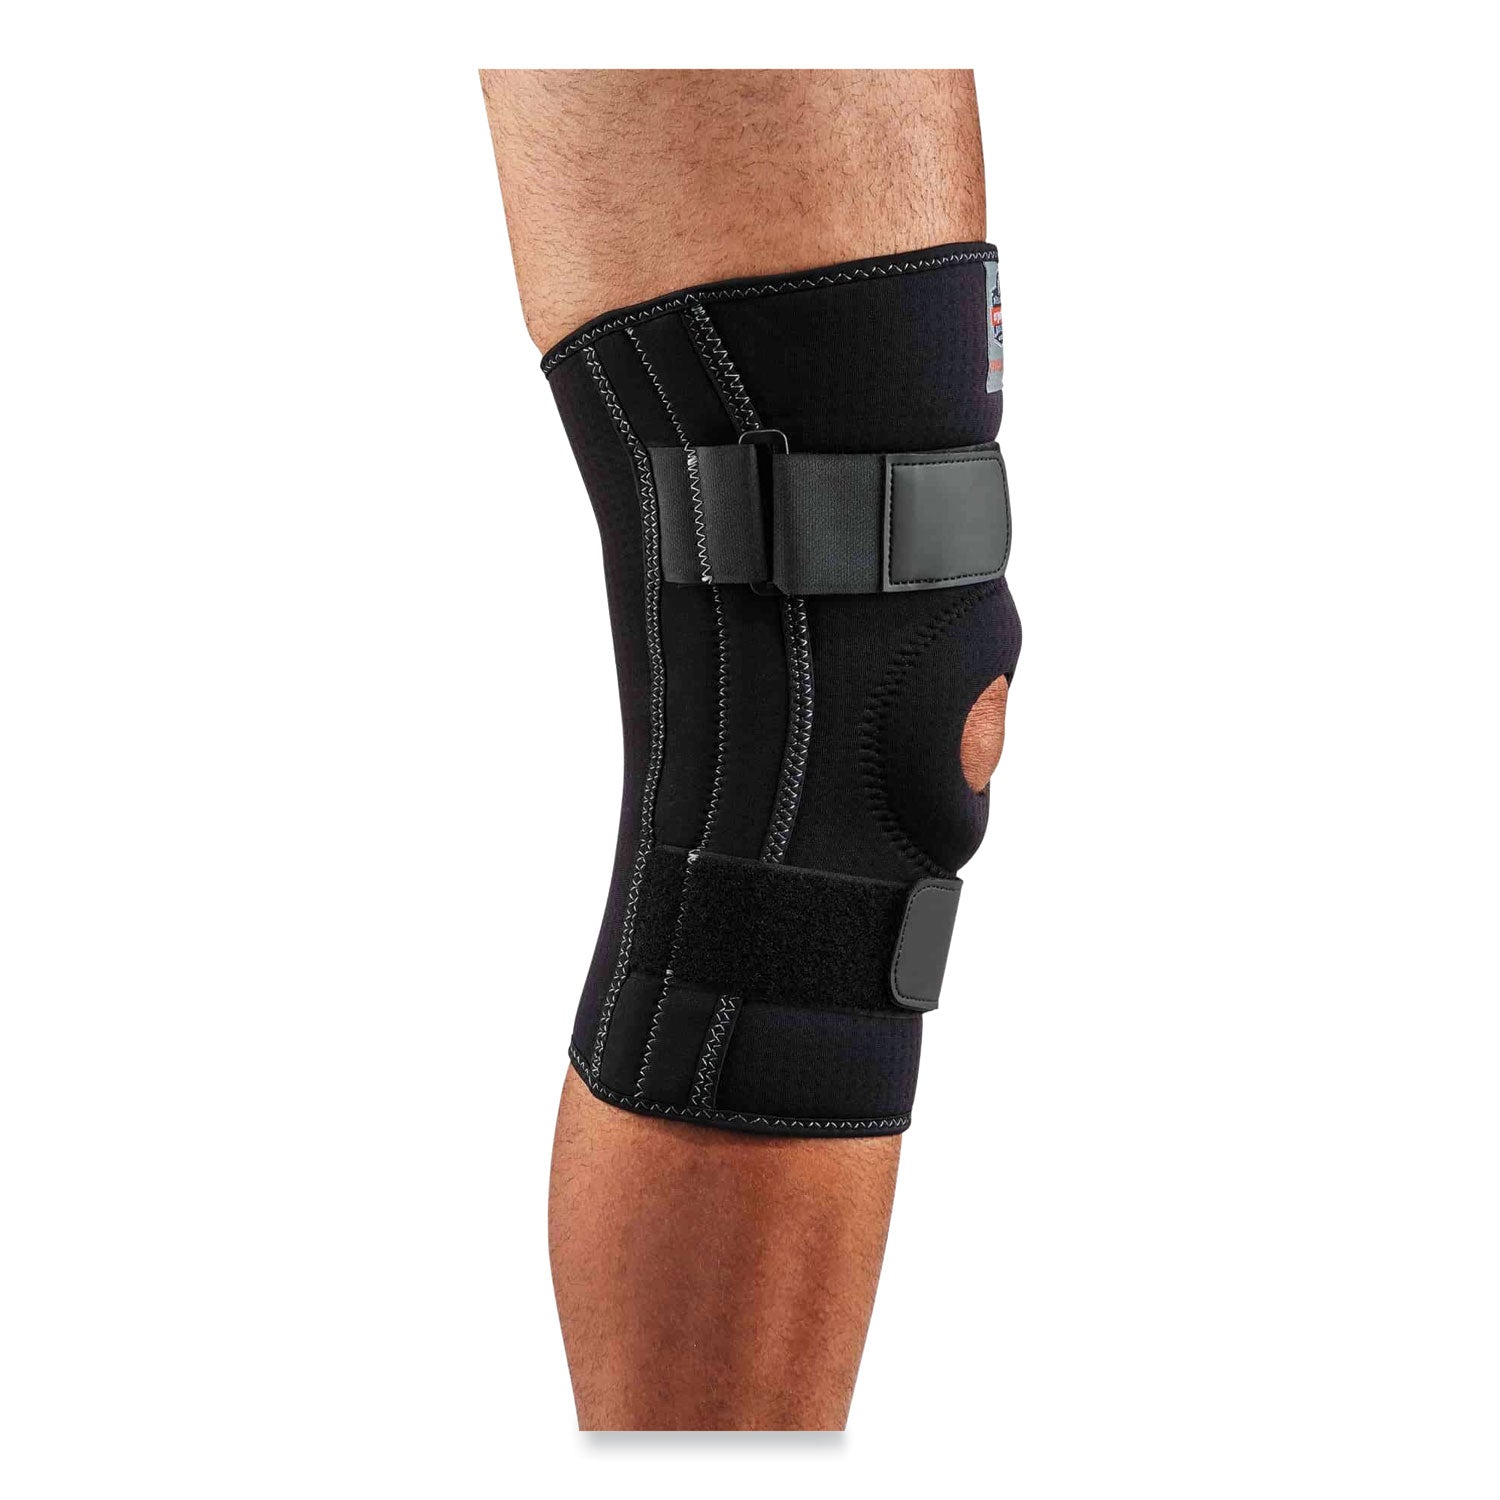 proflex-620-open-patella-spiral-stays-knee-sleeve-small-black-ships-in-1-3-business-days_ego16542 - 2